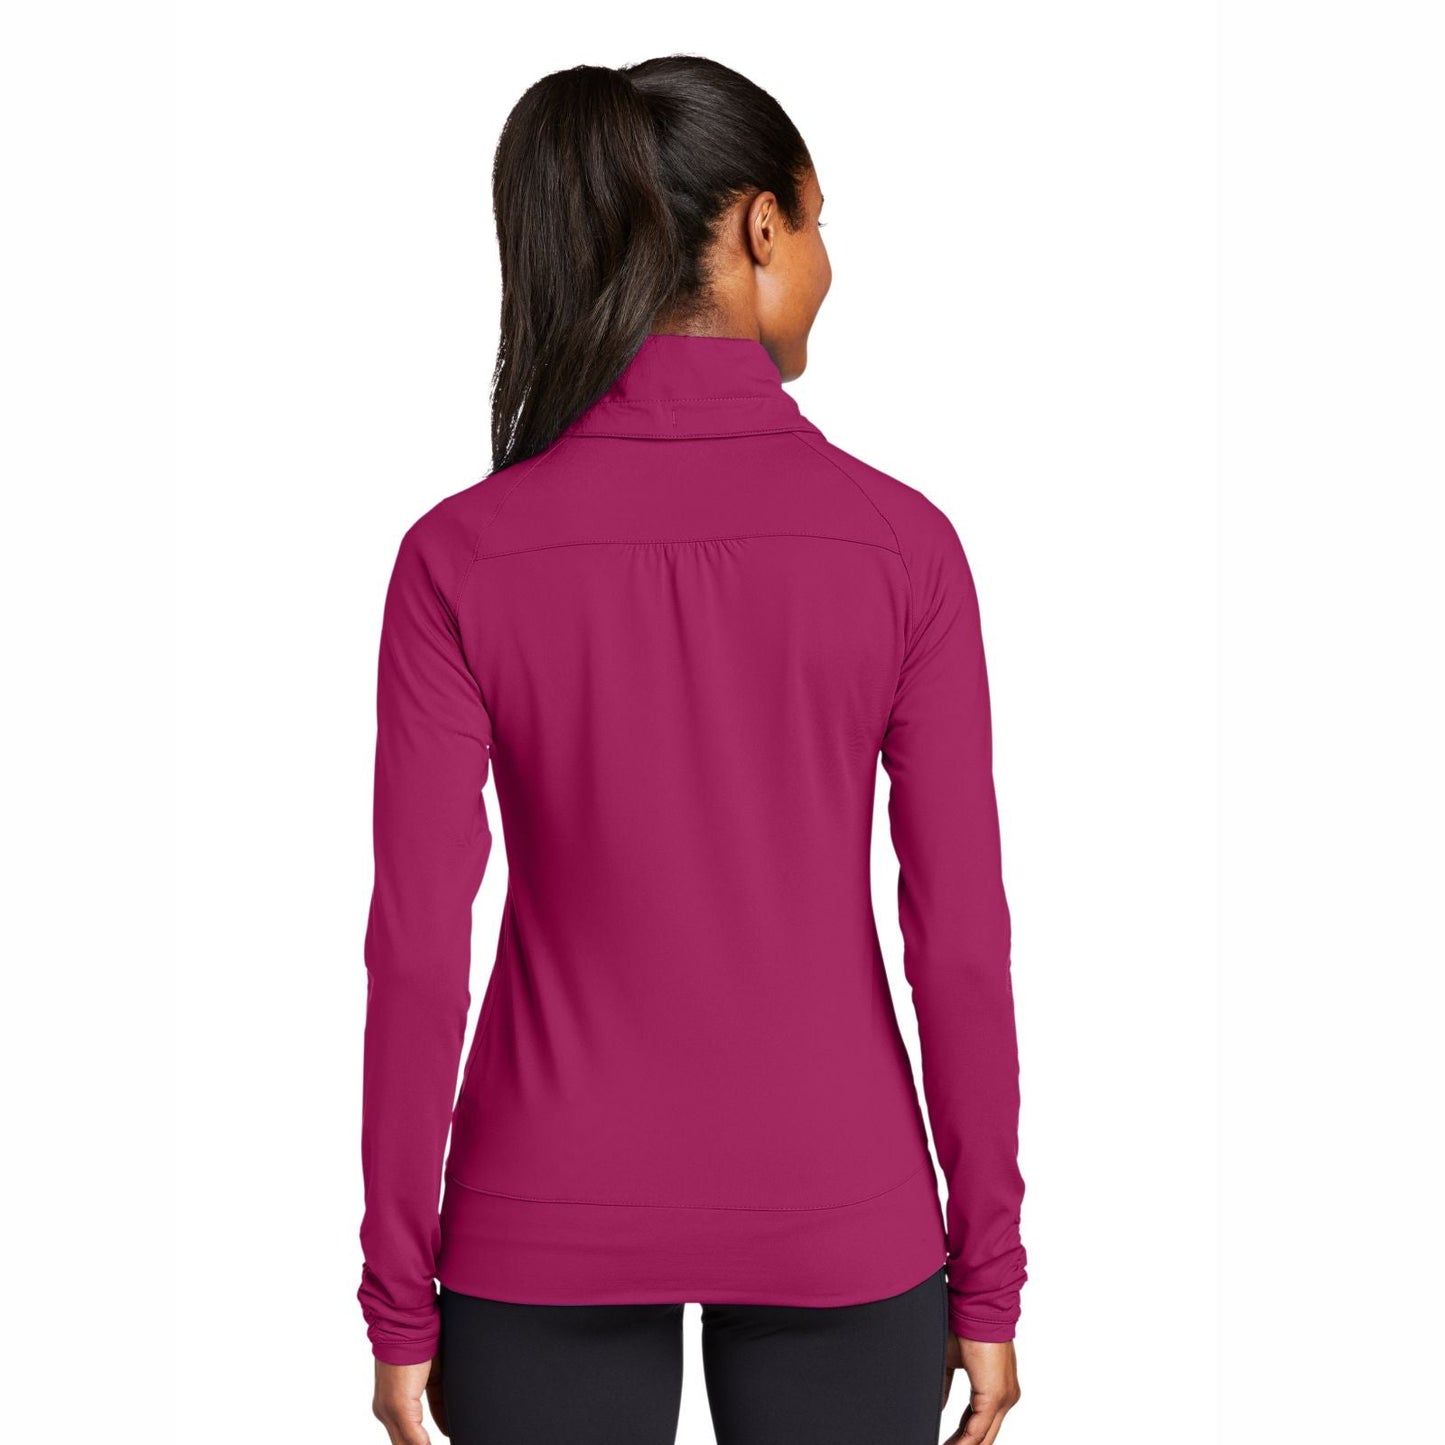 MBH Women's Cowl Stretch Zip Jacket -Pink Rush- Embroidery